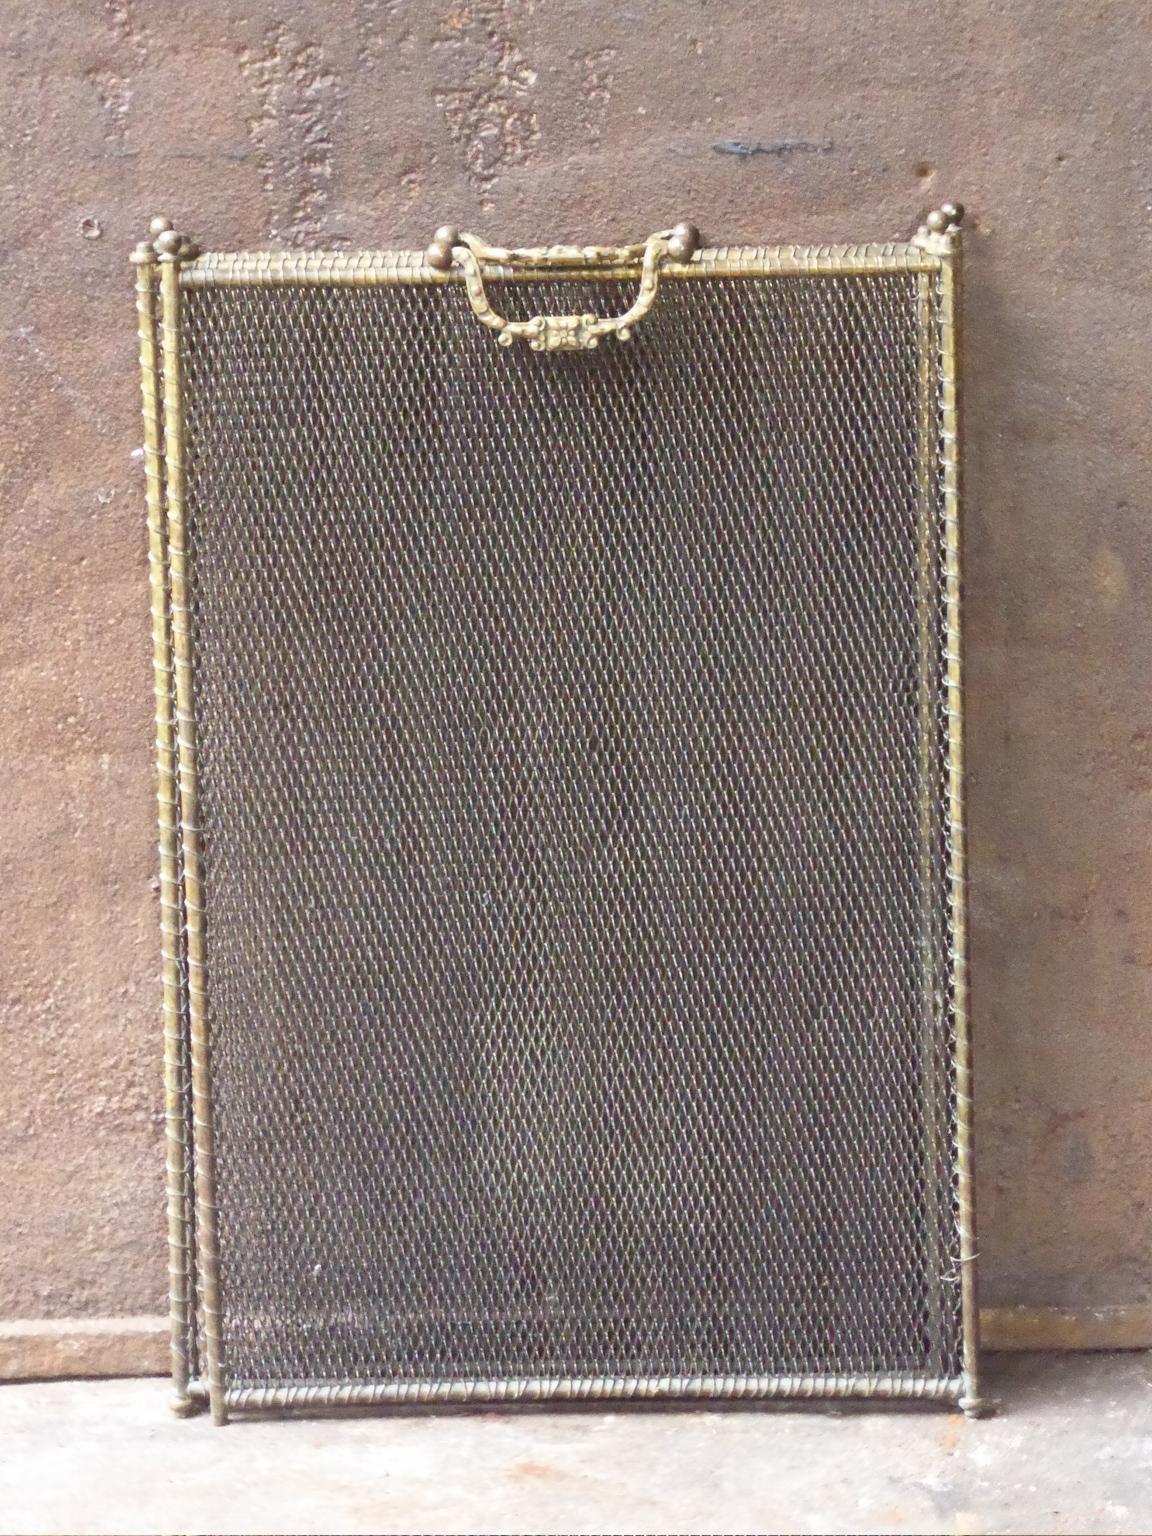 19th century French Napoleon III three-panel fire screen. The screen is made of brass, iron and iron mesh. It is in a good condition and is fit for use in front of the fireplace.